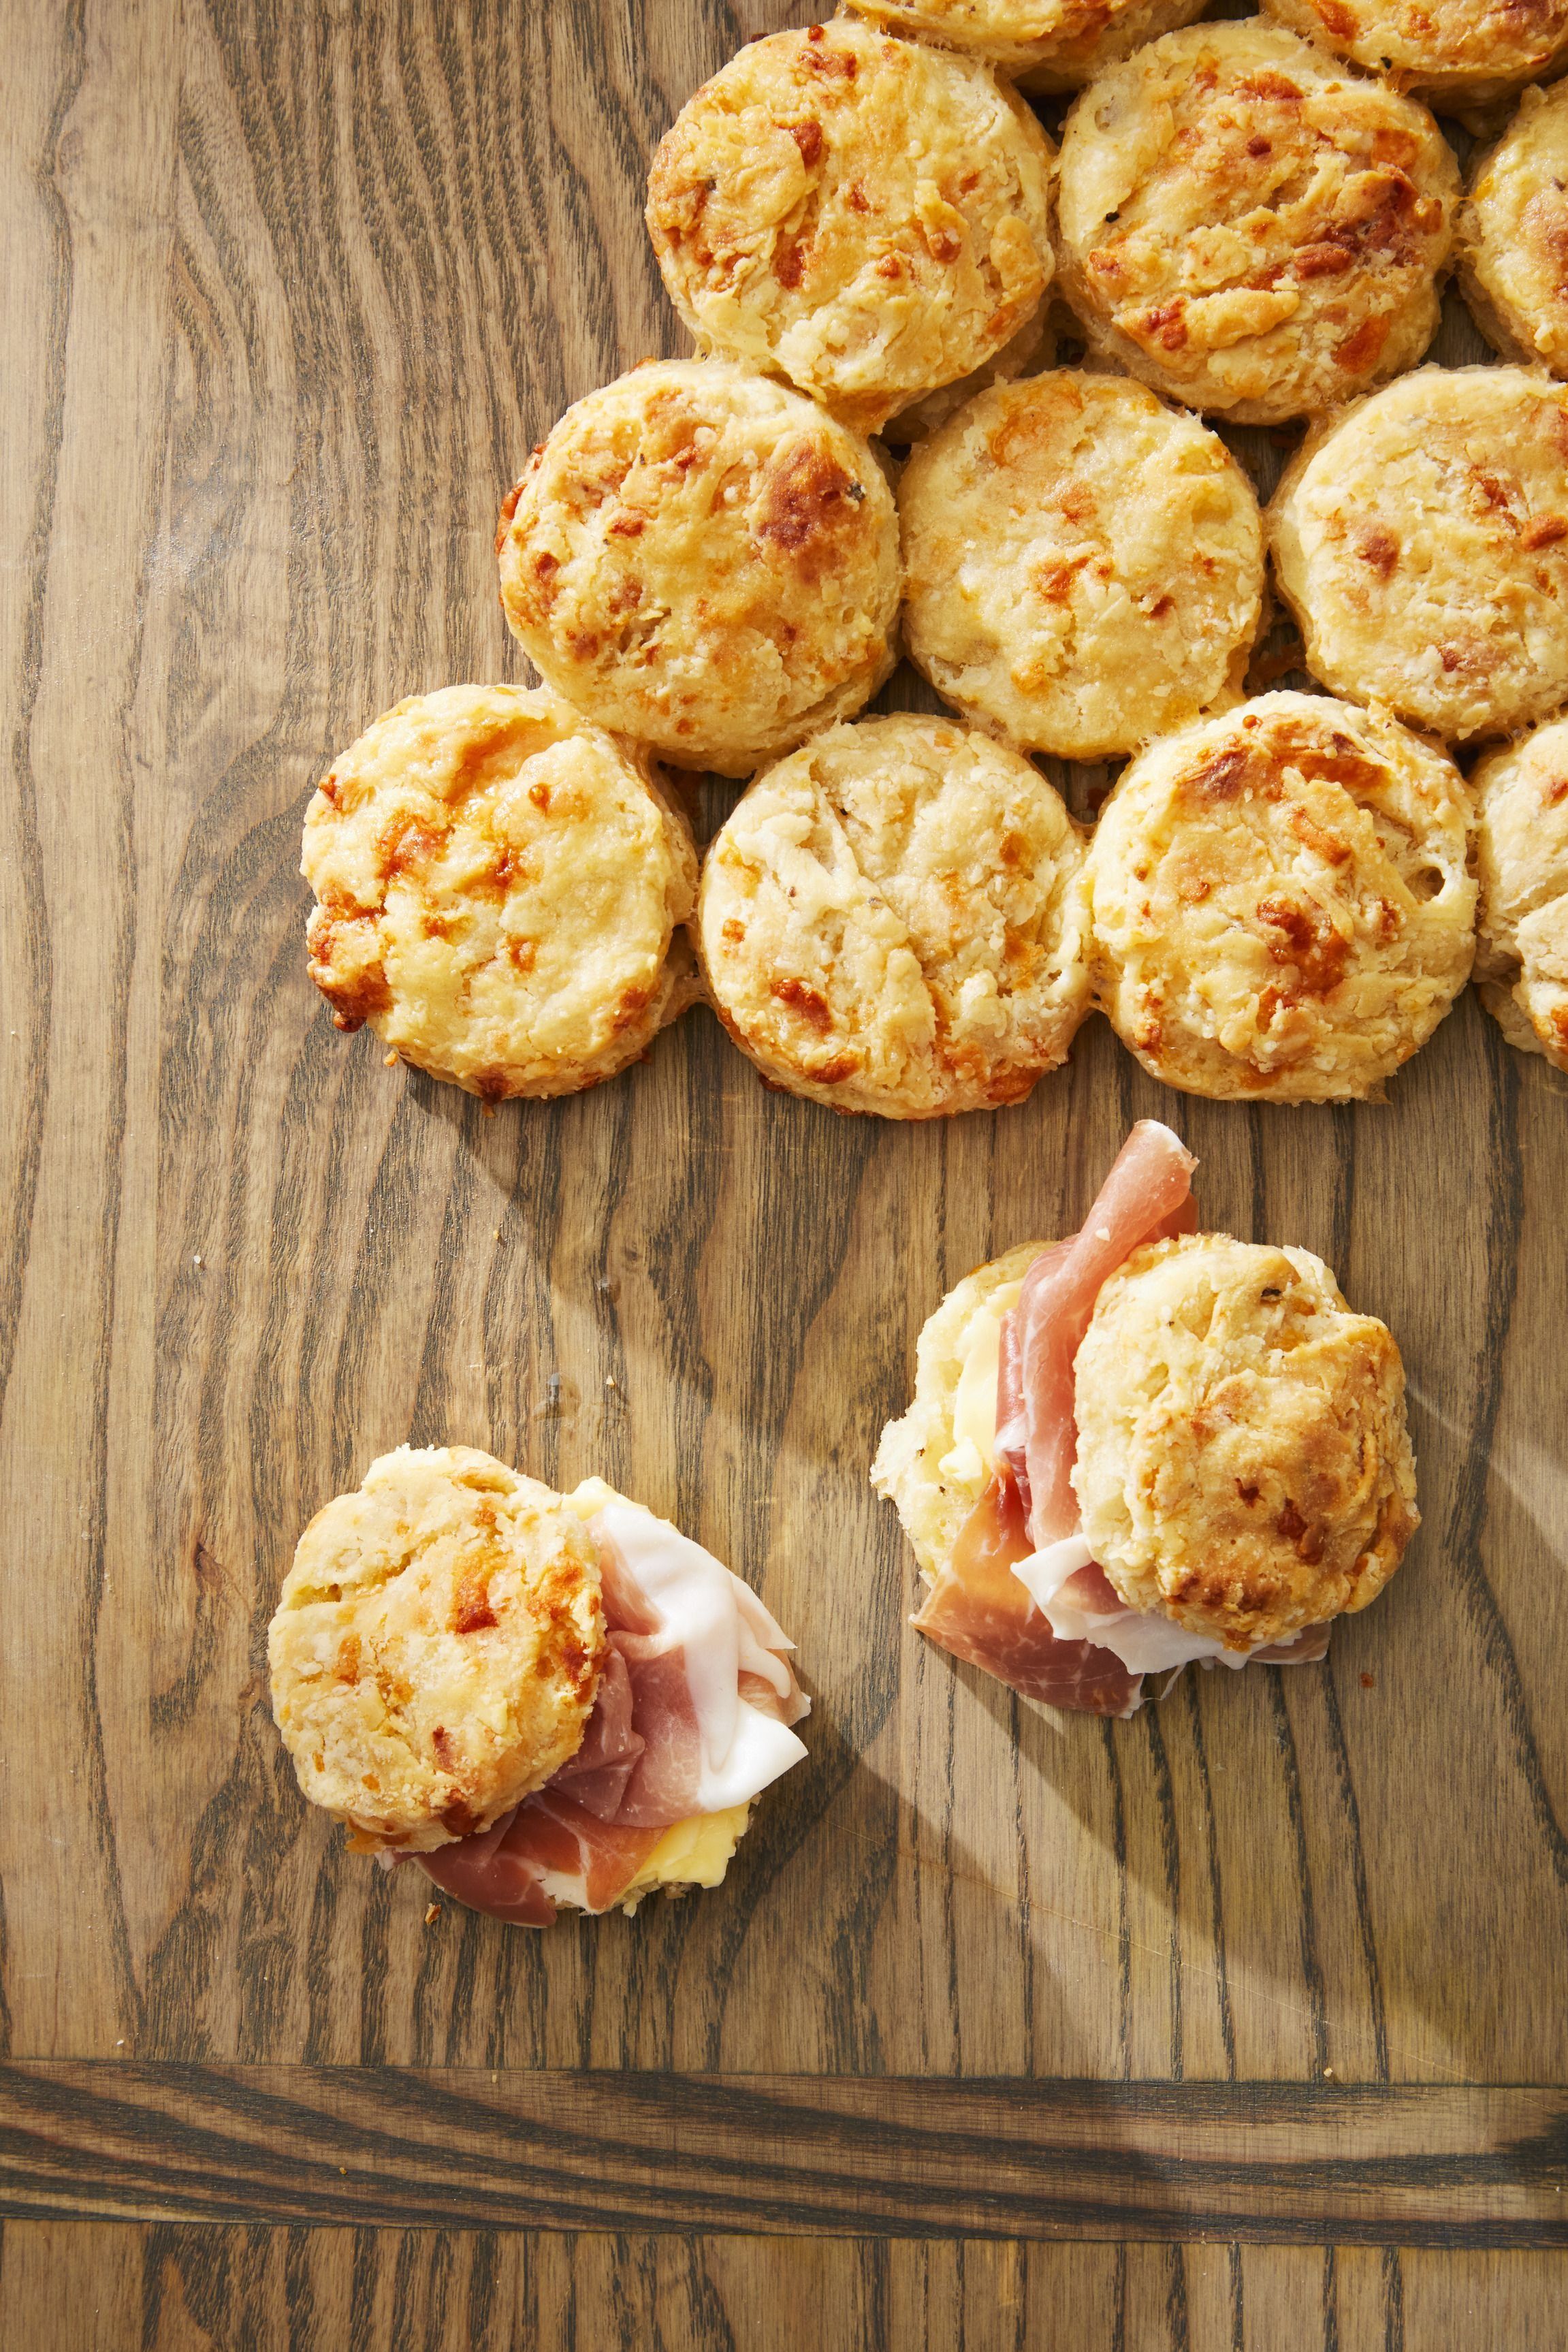 https://hips.hearstapps.com/hmg-prod/images/christmas-breakfast-ideas-asiago-cheese-biscuits-6579f2c7e1ca4.jpeg